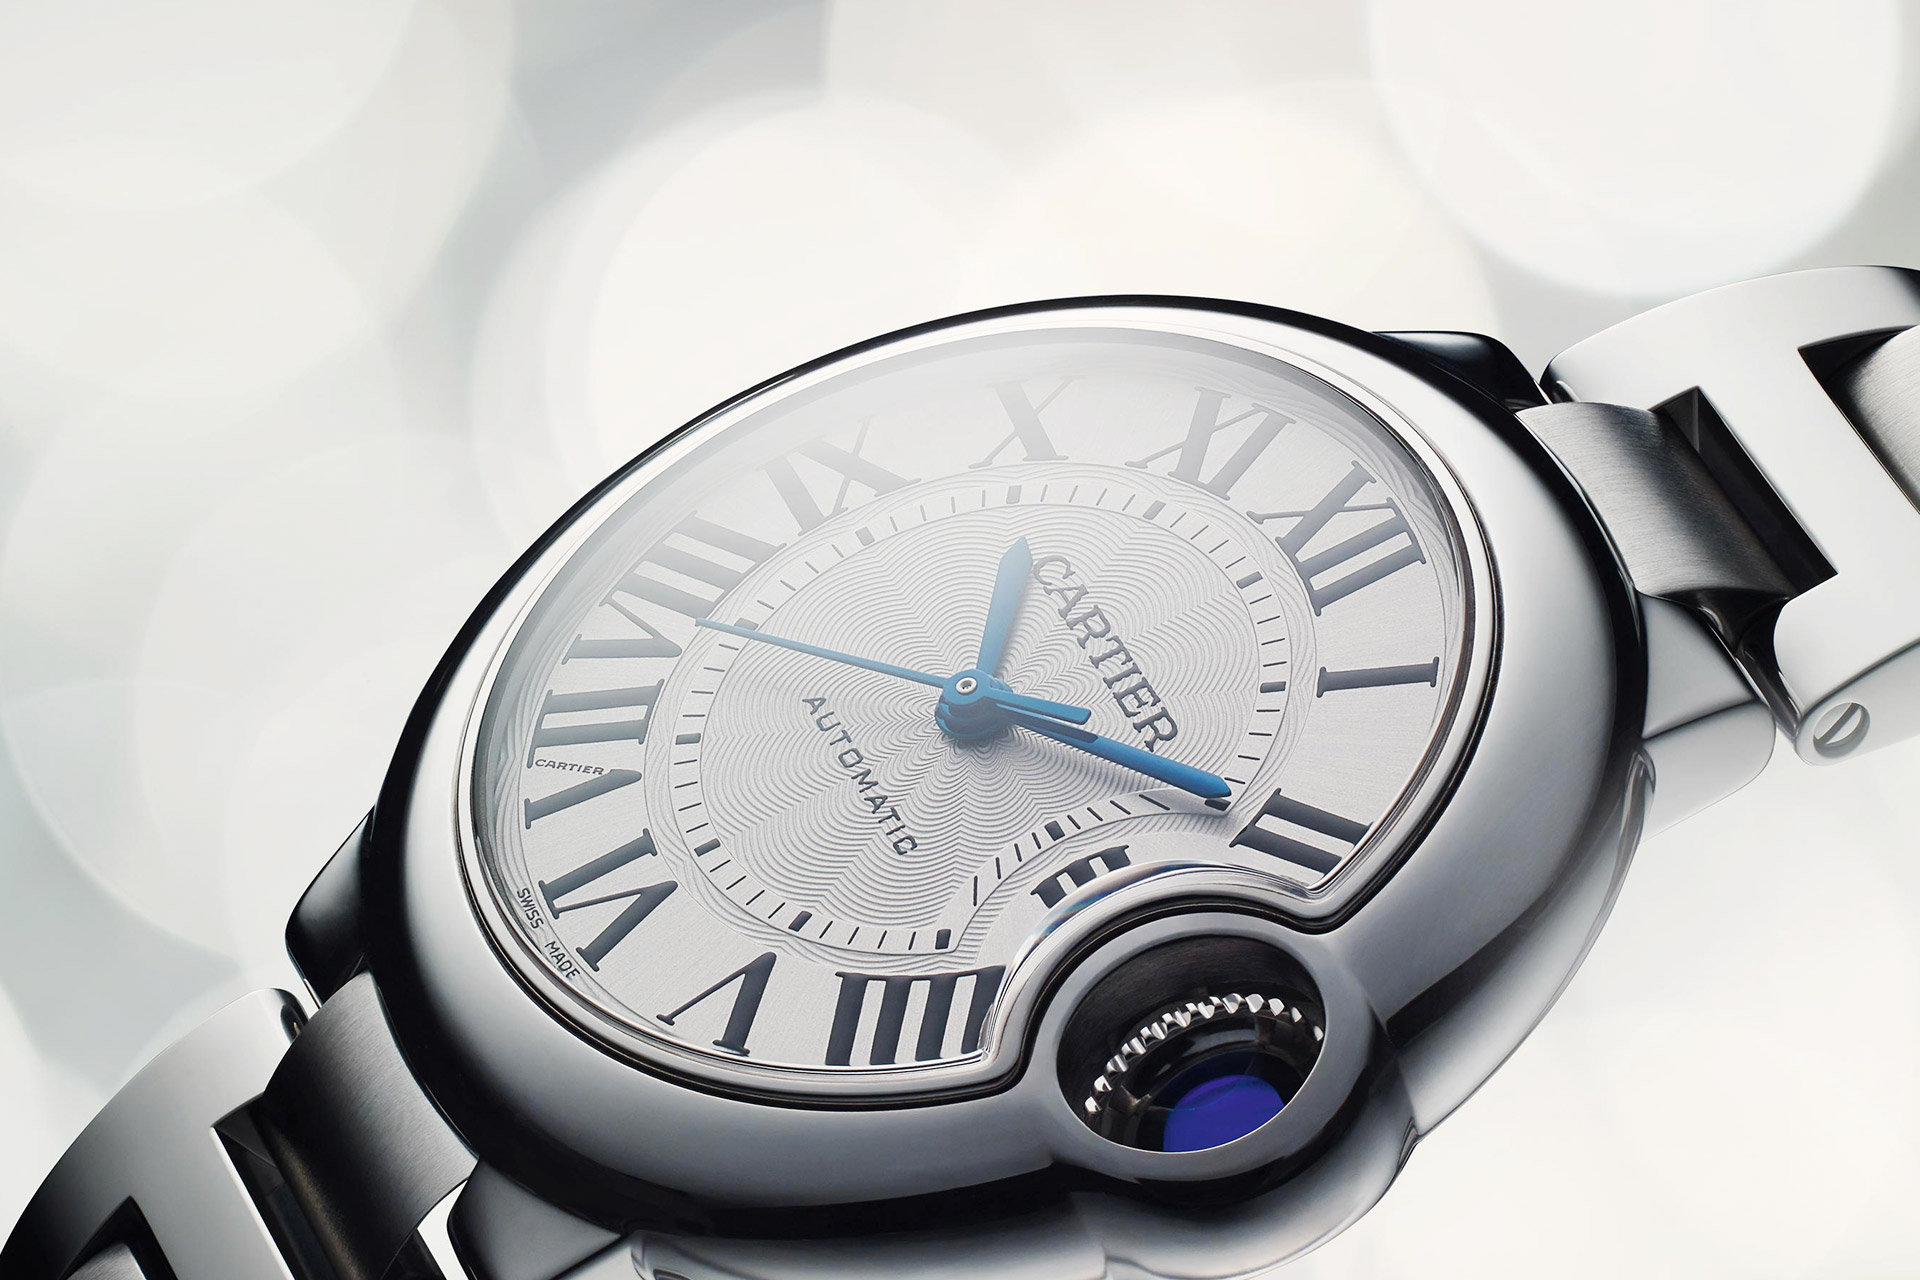 Careers - The Watches of Switzerland Group